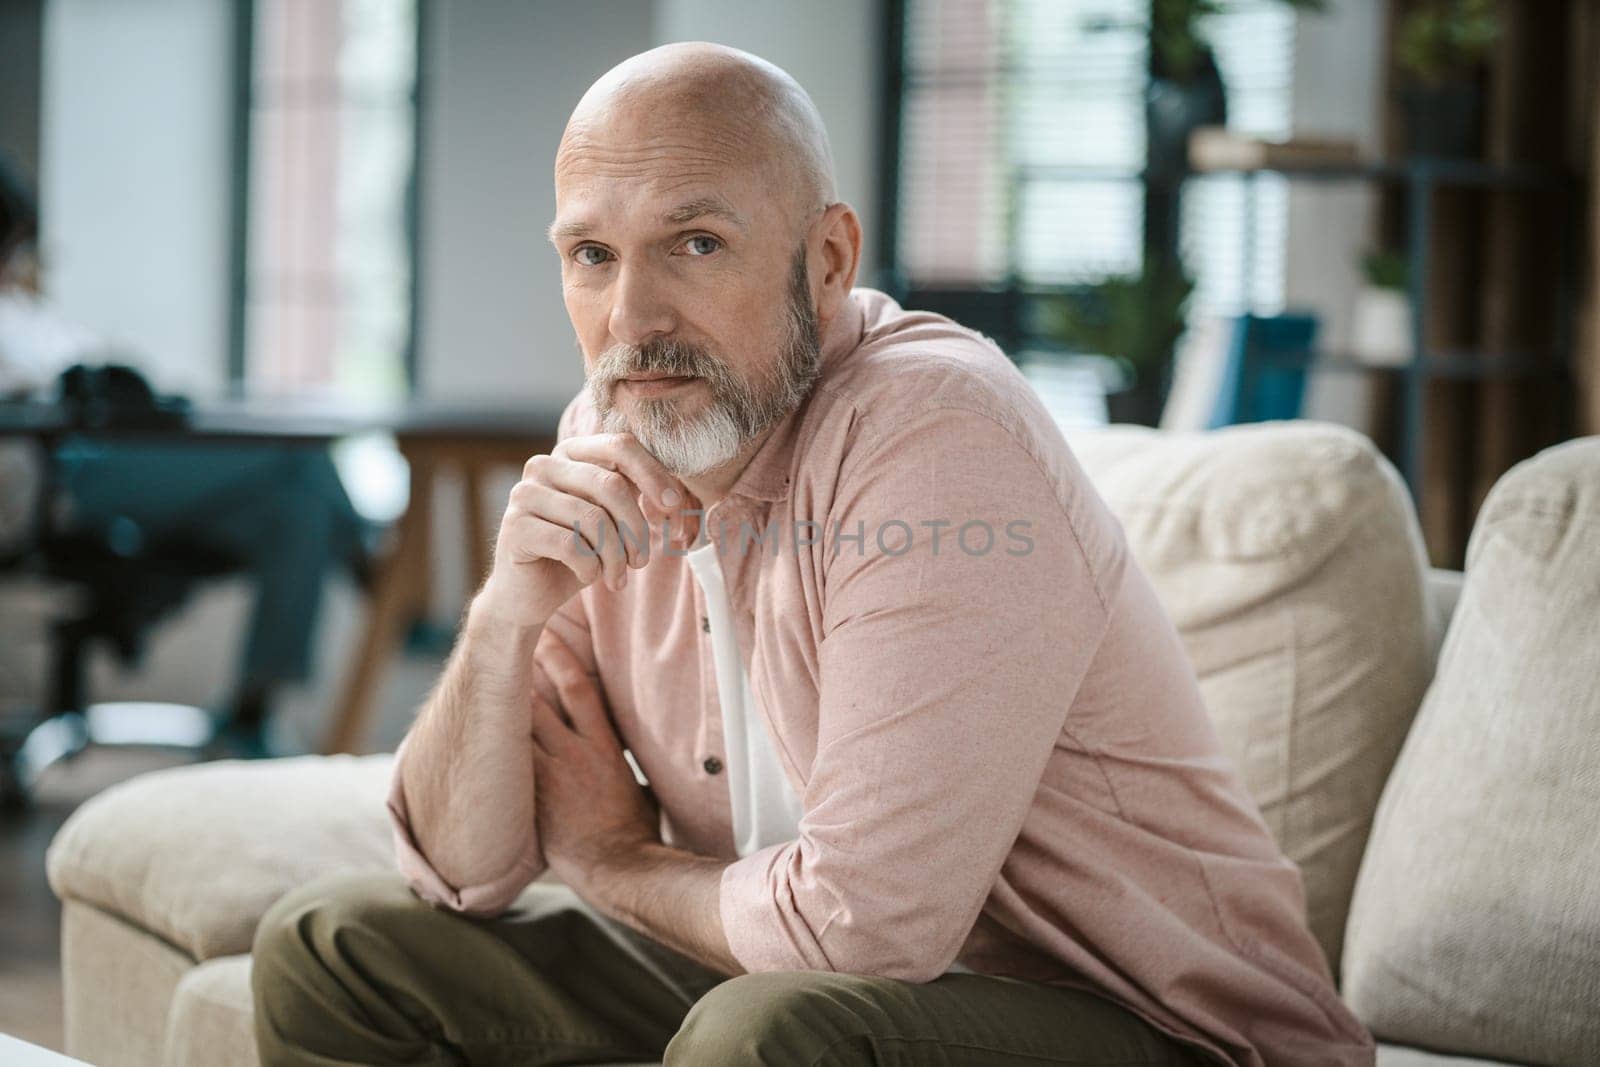 Wise senior man, with touch of grey in beard, looks directly into camera within cozy interior of home. His hand gently rests upon silver beard, exuding sense of thoughtfulness and contemplation. by LipikStockMedia